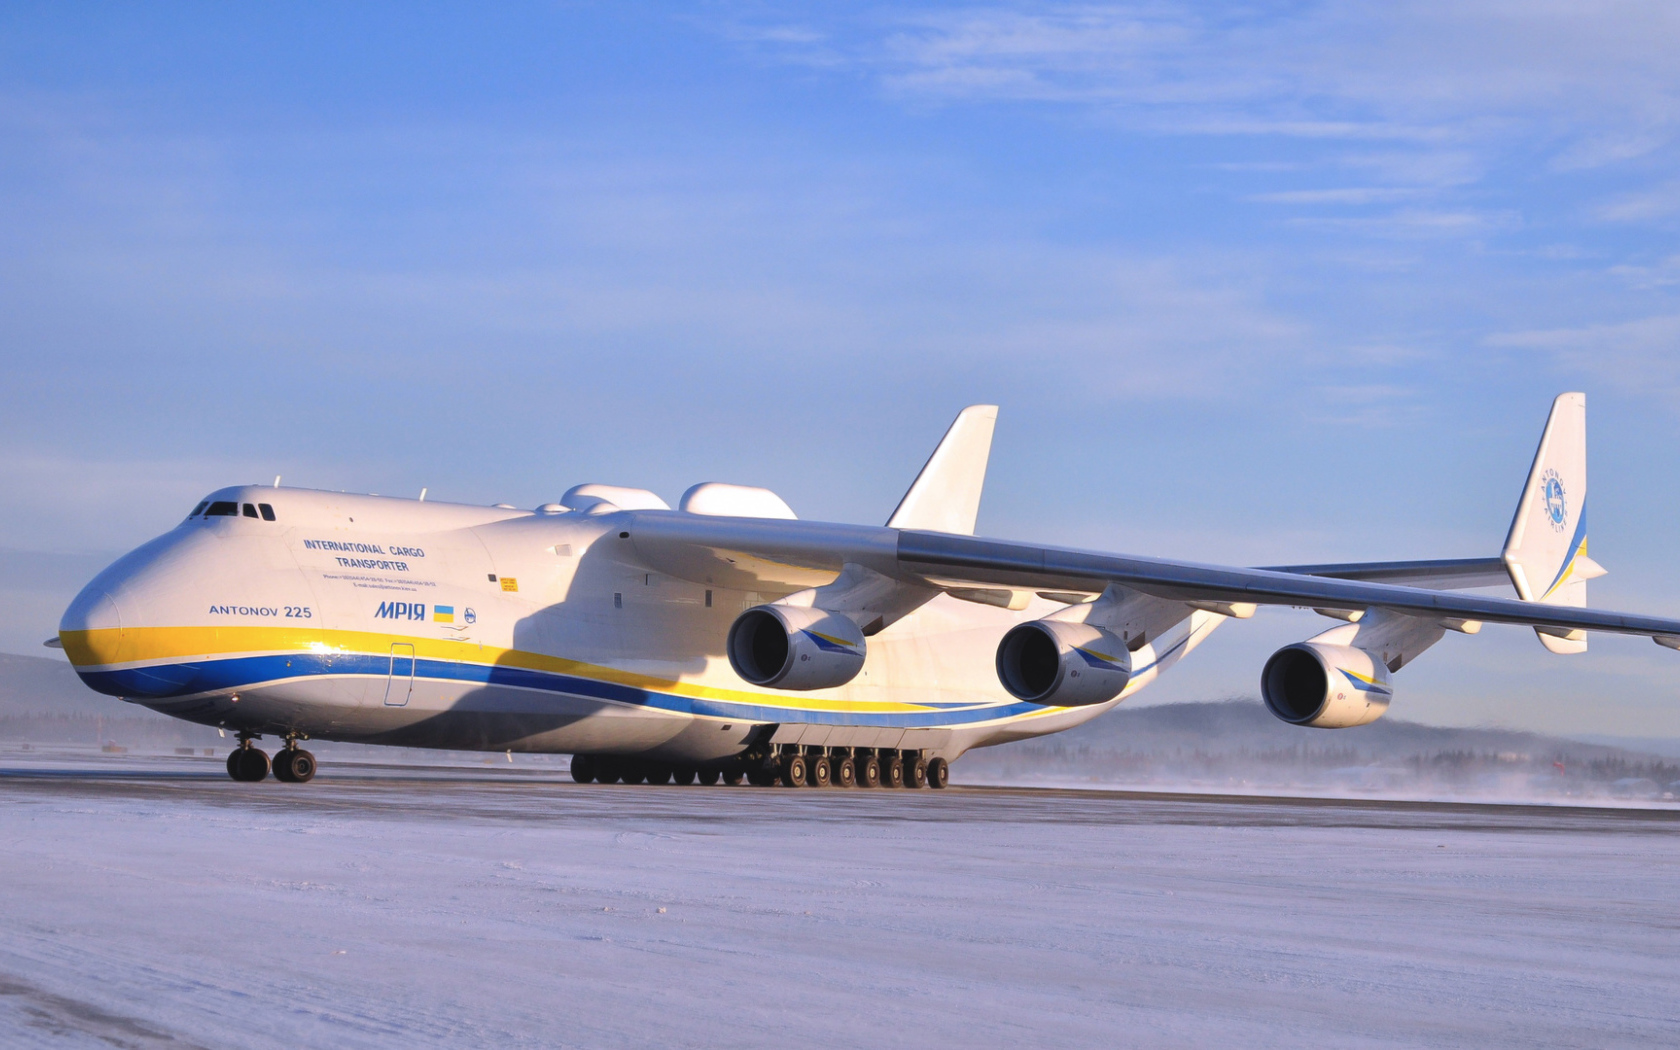 The largest aircraft An-225 Mriya on the runway in winter